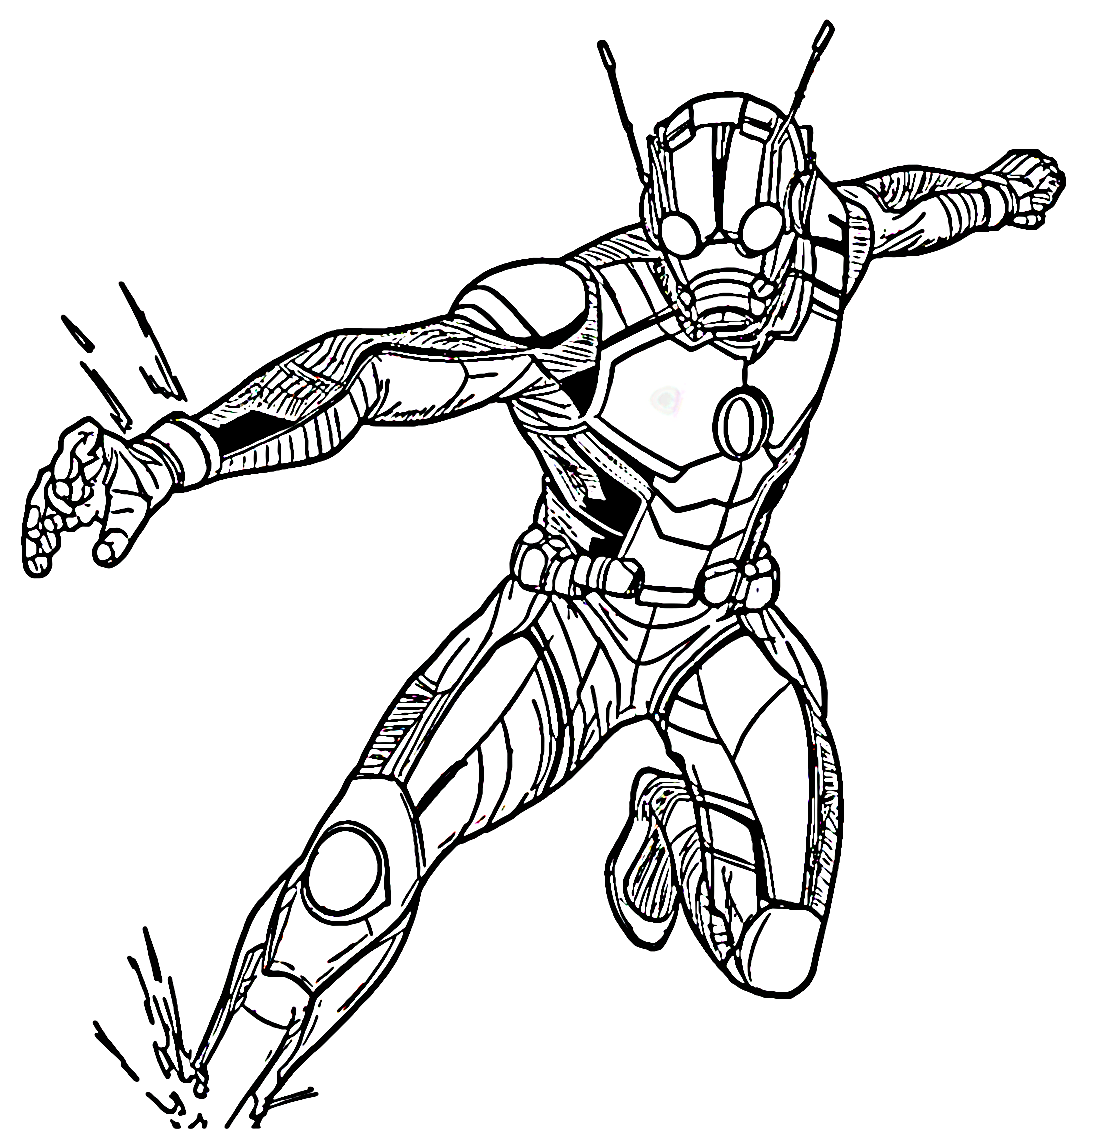 Ant-Man combat Coloring Pages